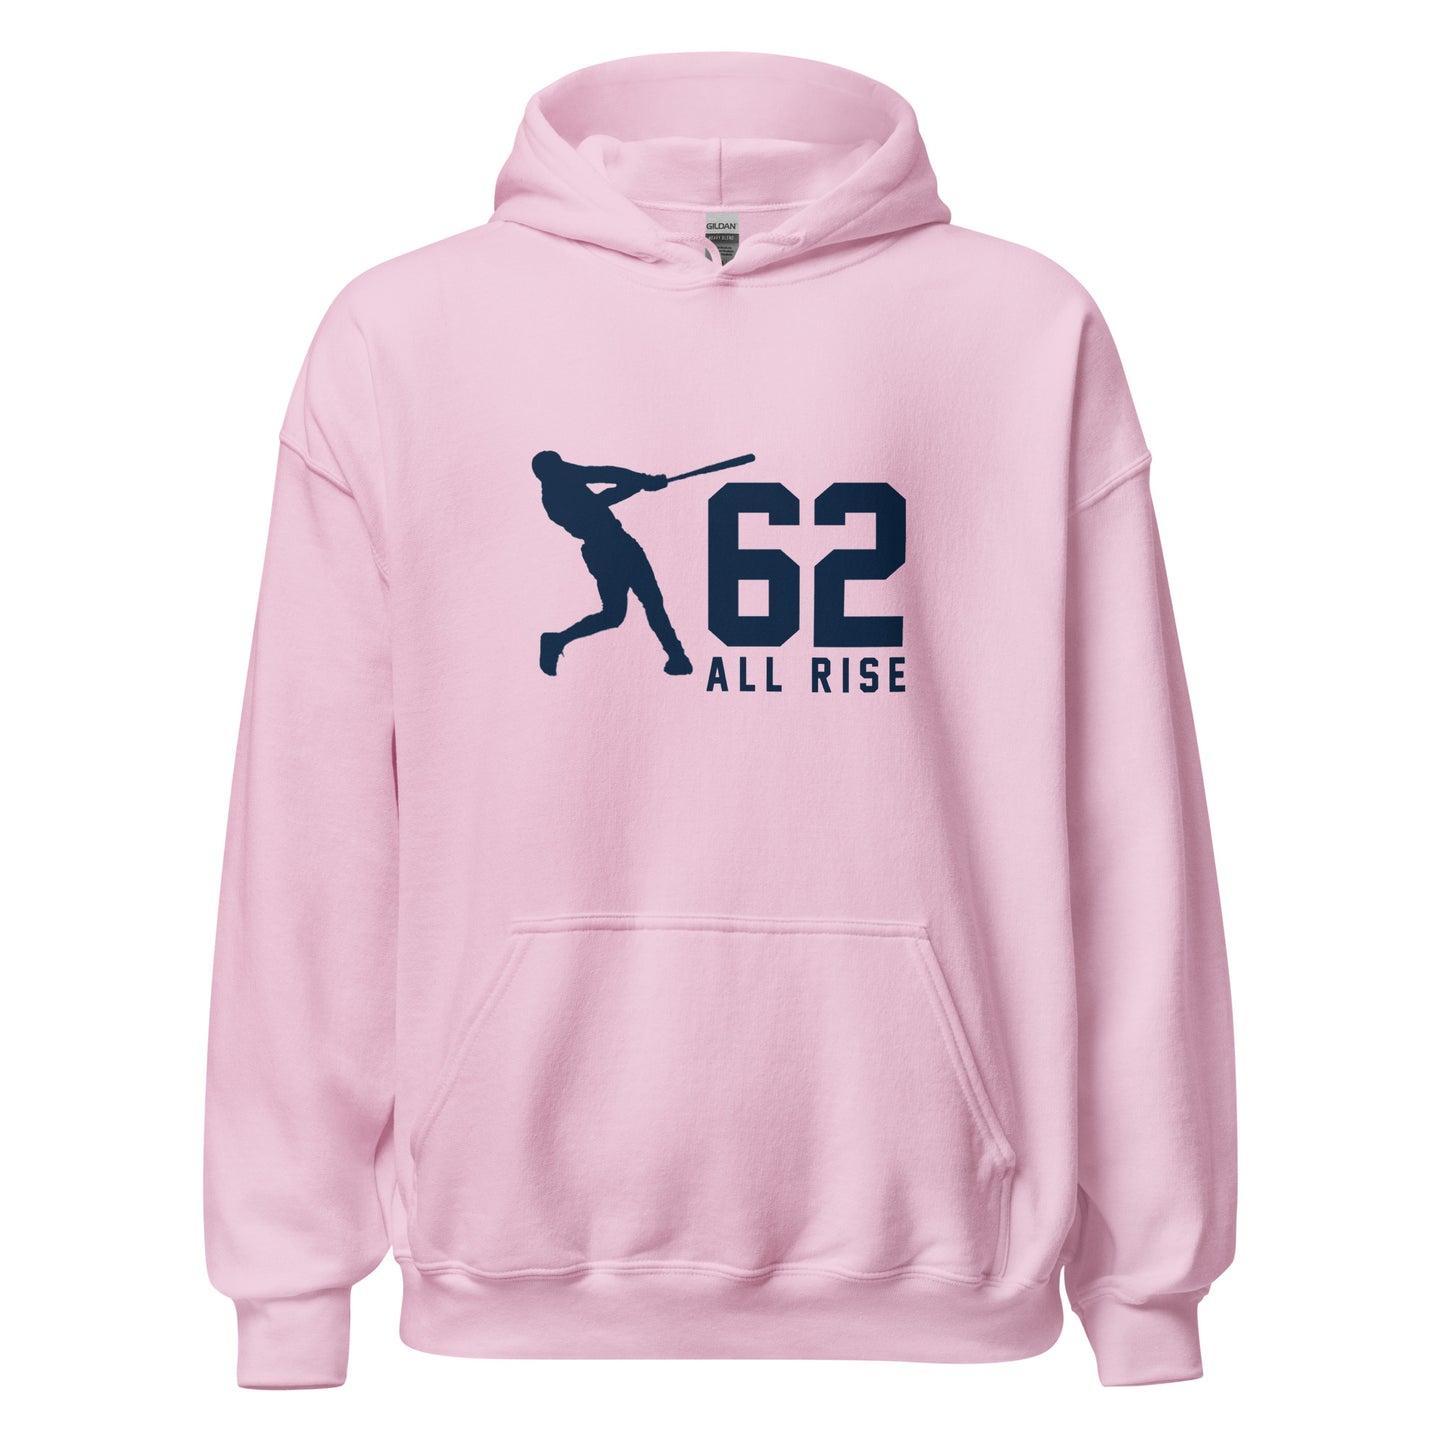 62 All Rise Light Color Unisex Hoodie